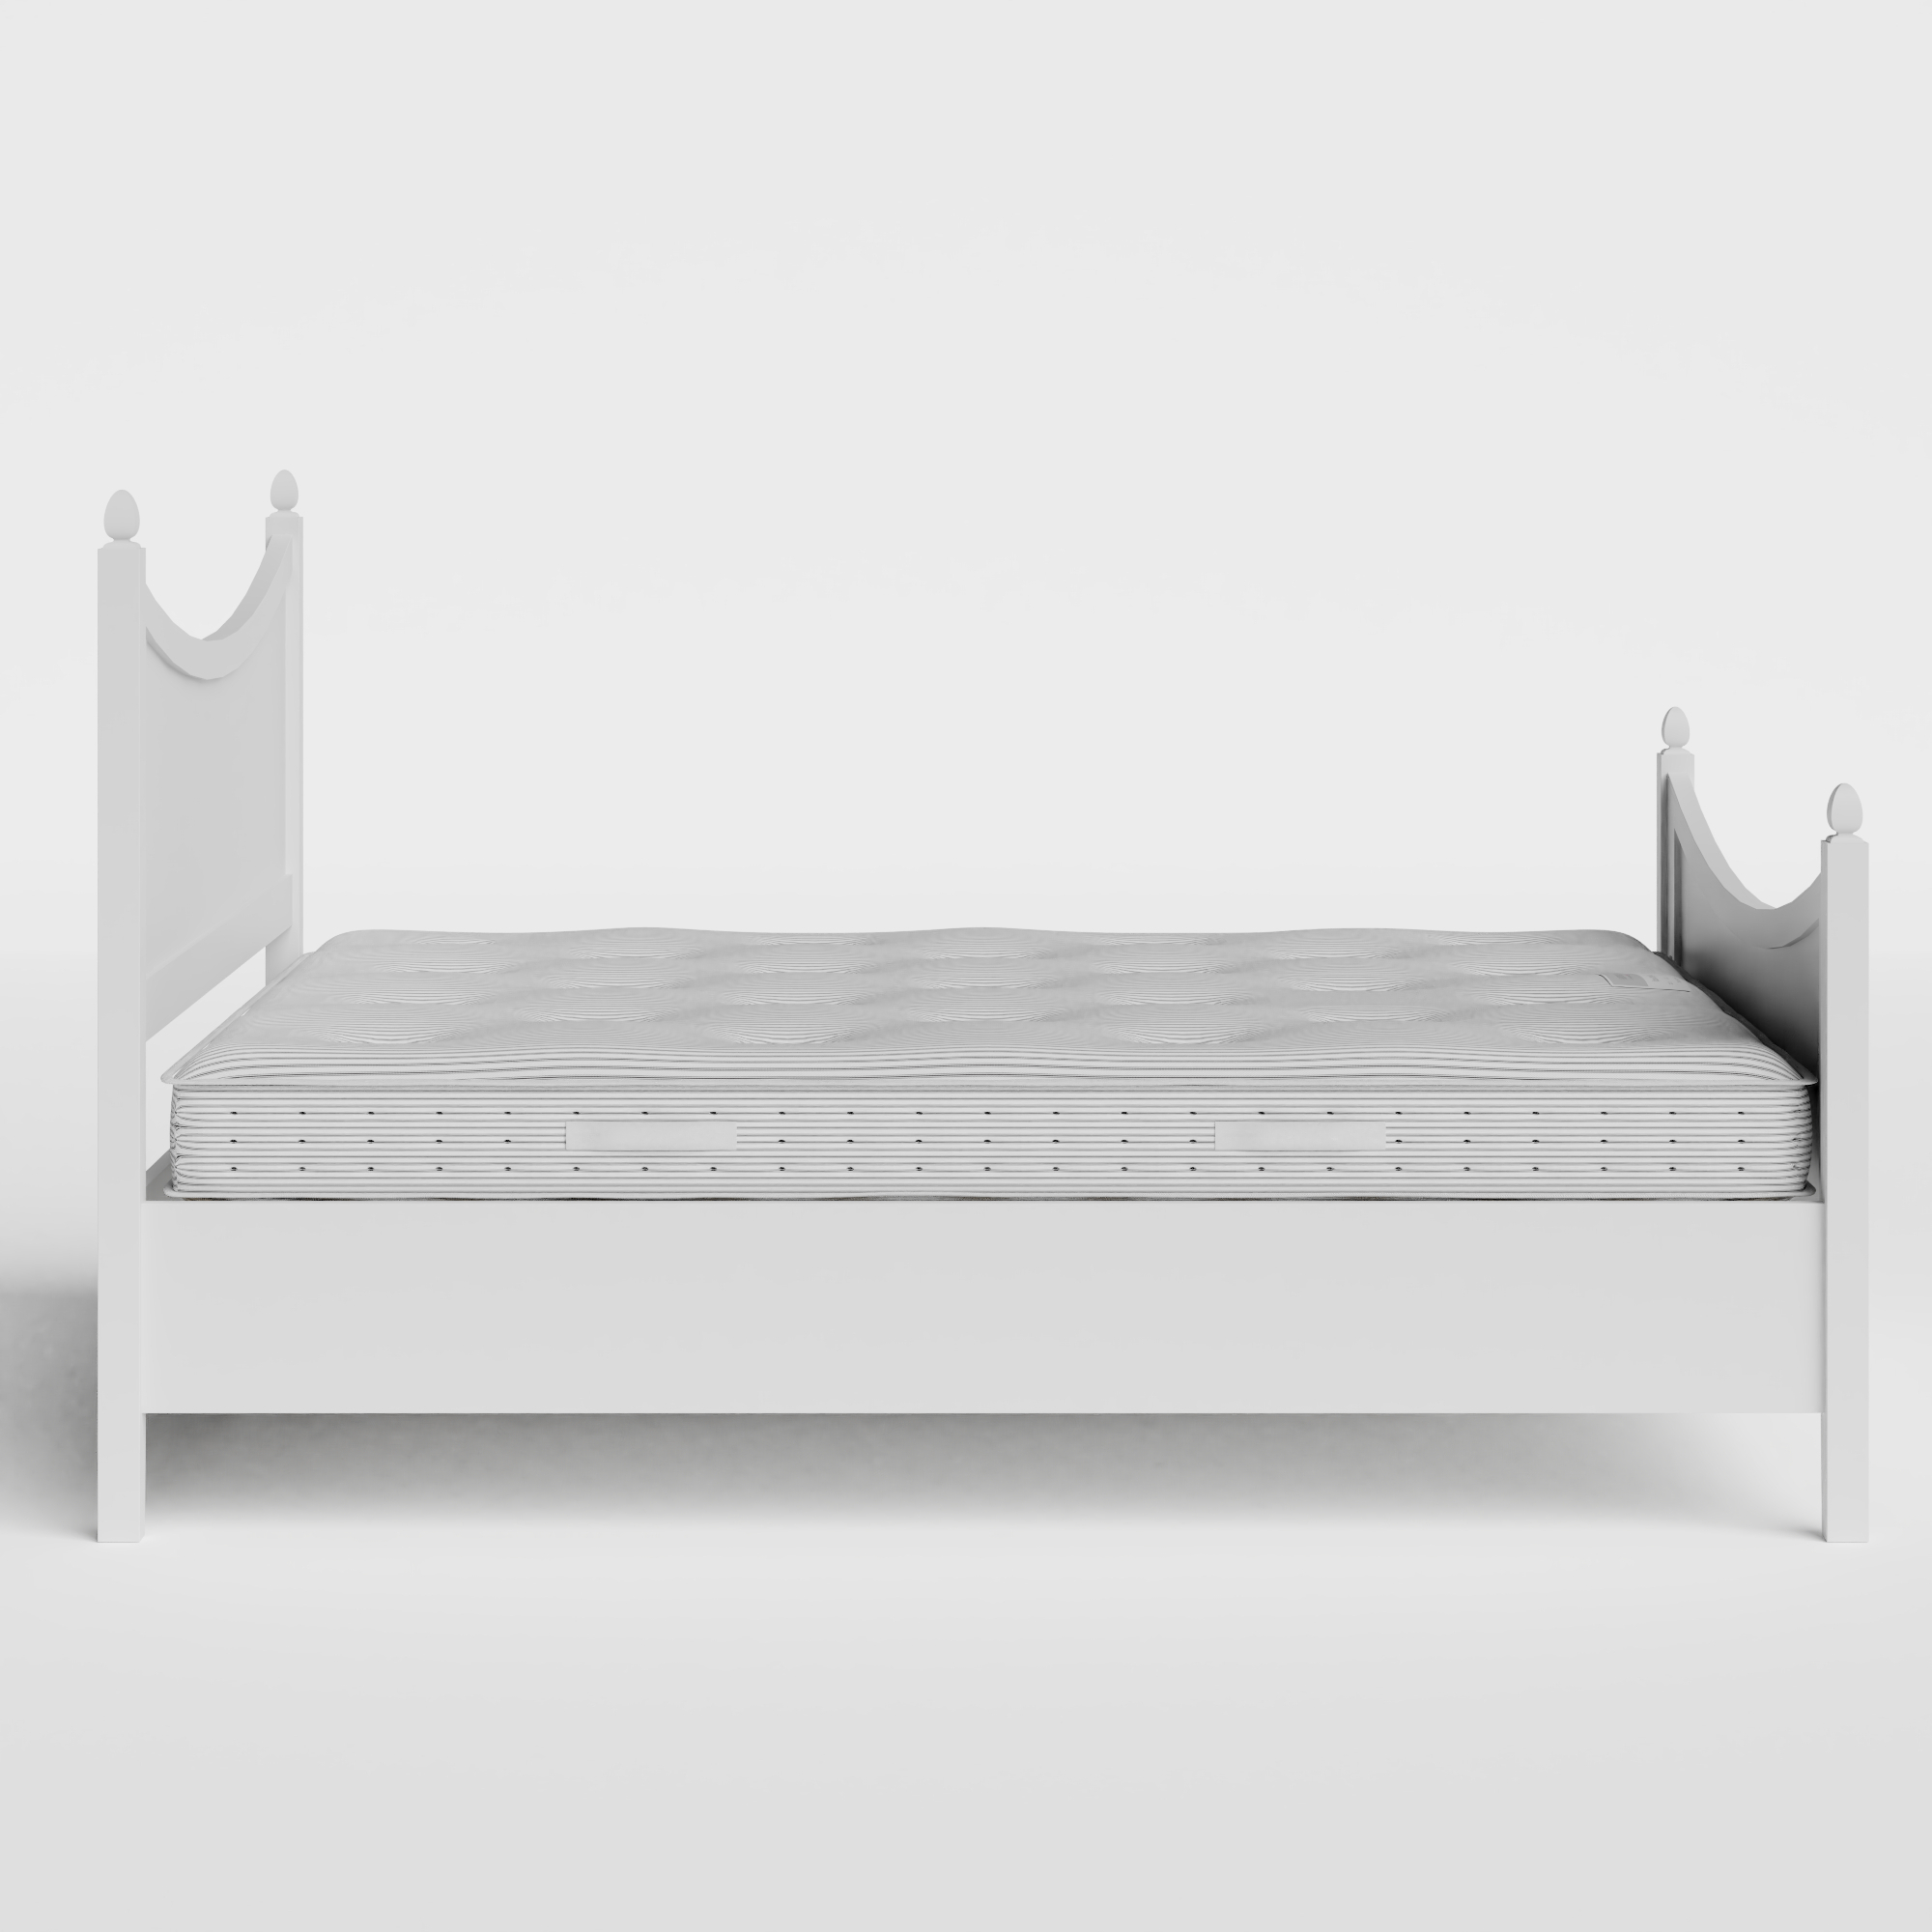 Blake Painted painted wood bed in white with Juno mattress